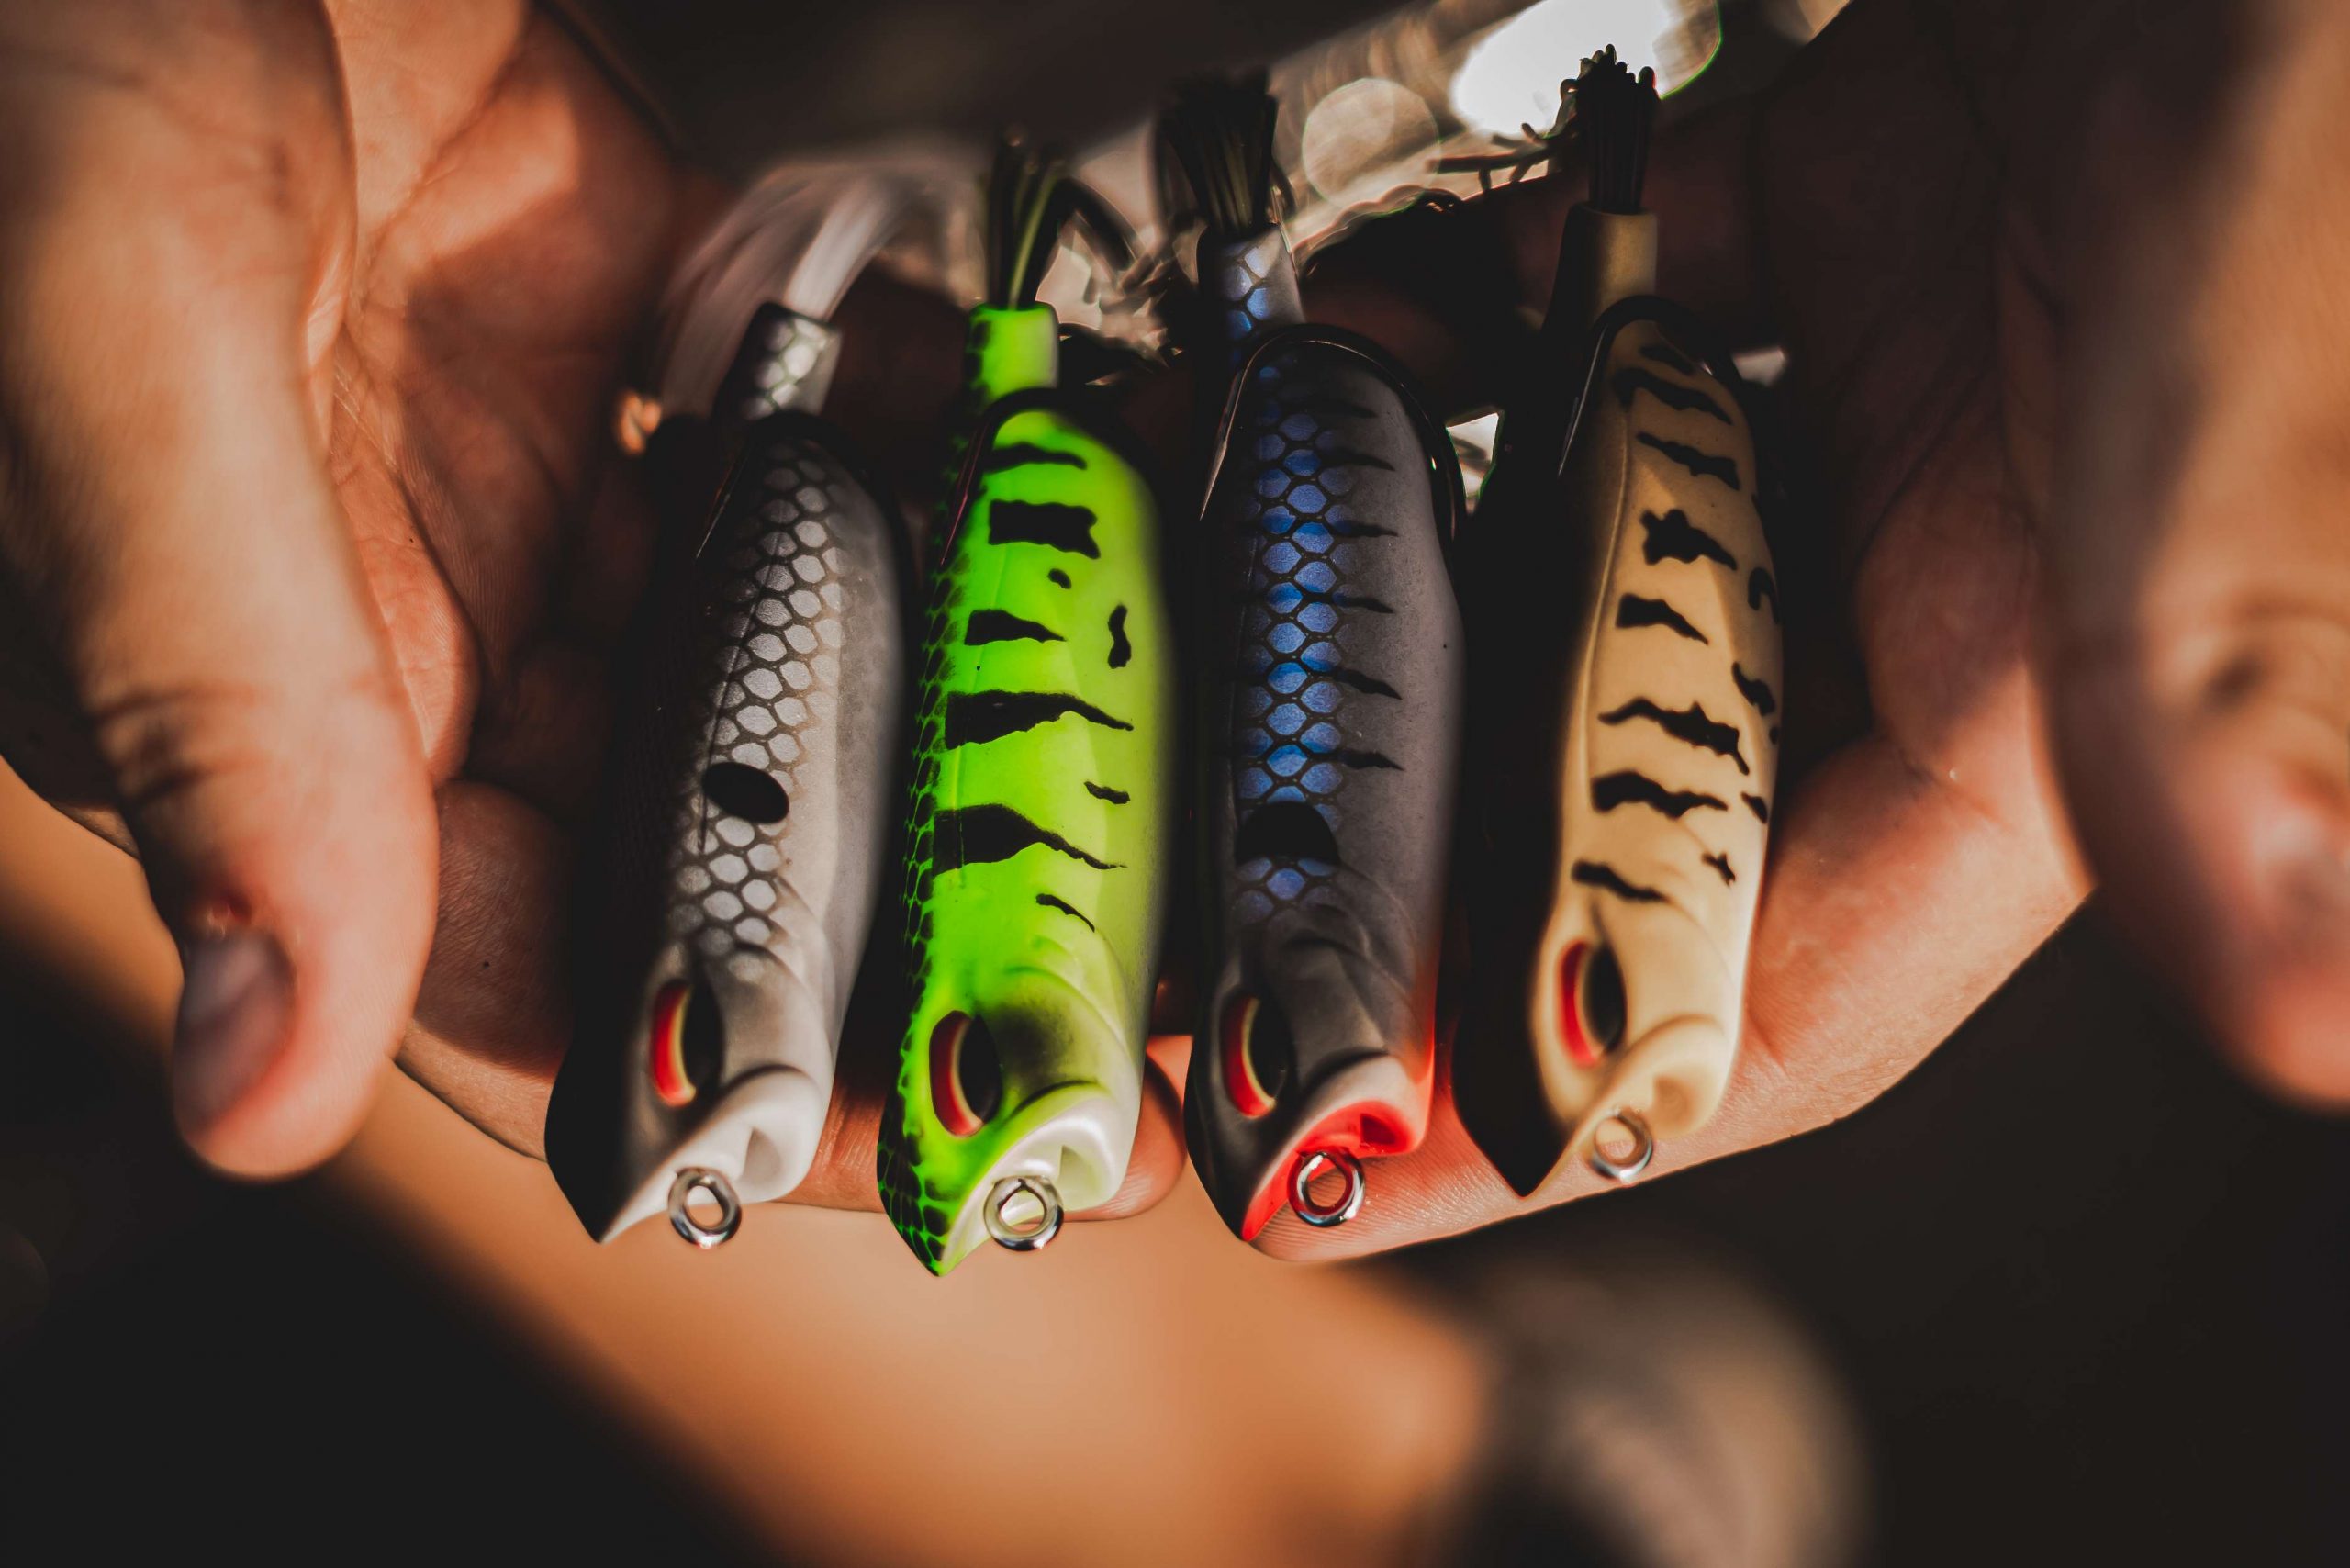 Vega Frogs are Back In Stock! After - 6th Sense Fishing